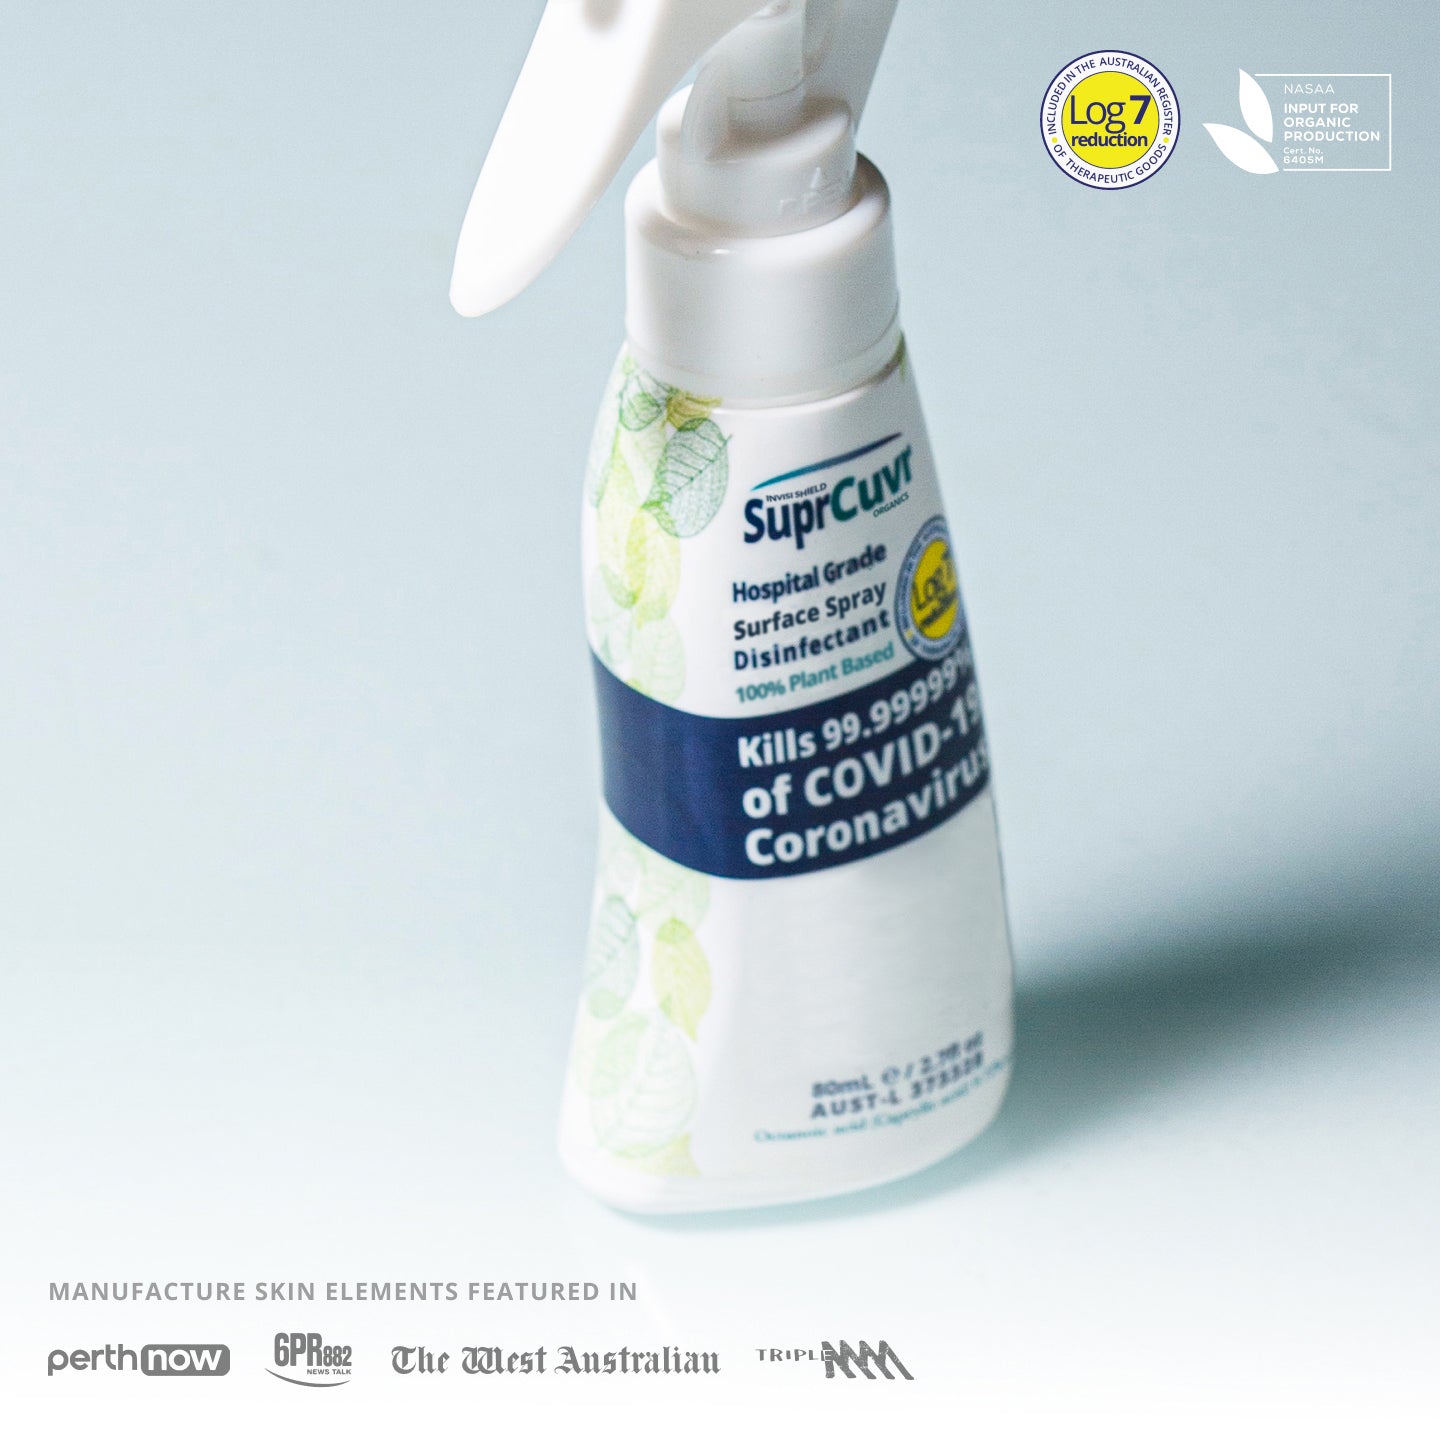 SuprCuvr Hospital Grade Disinfectant Surface Spray 80ml